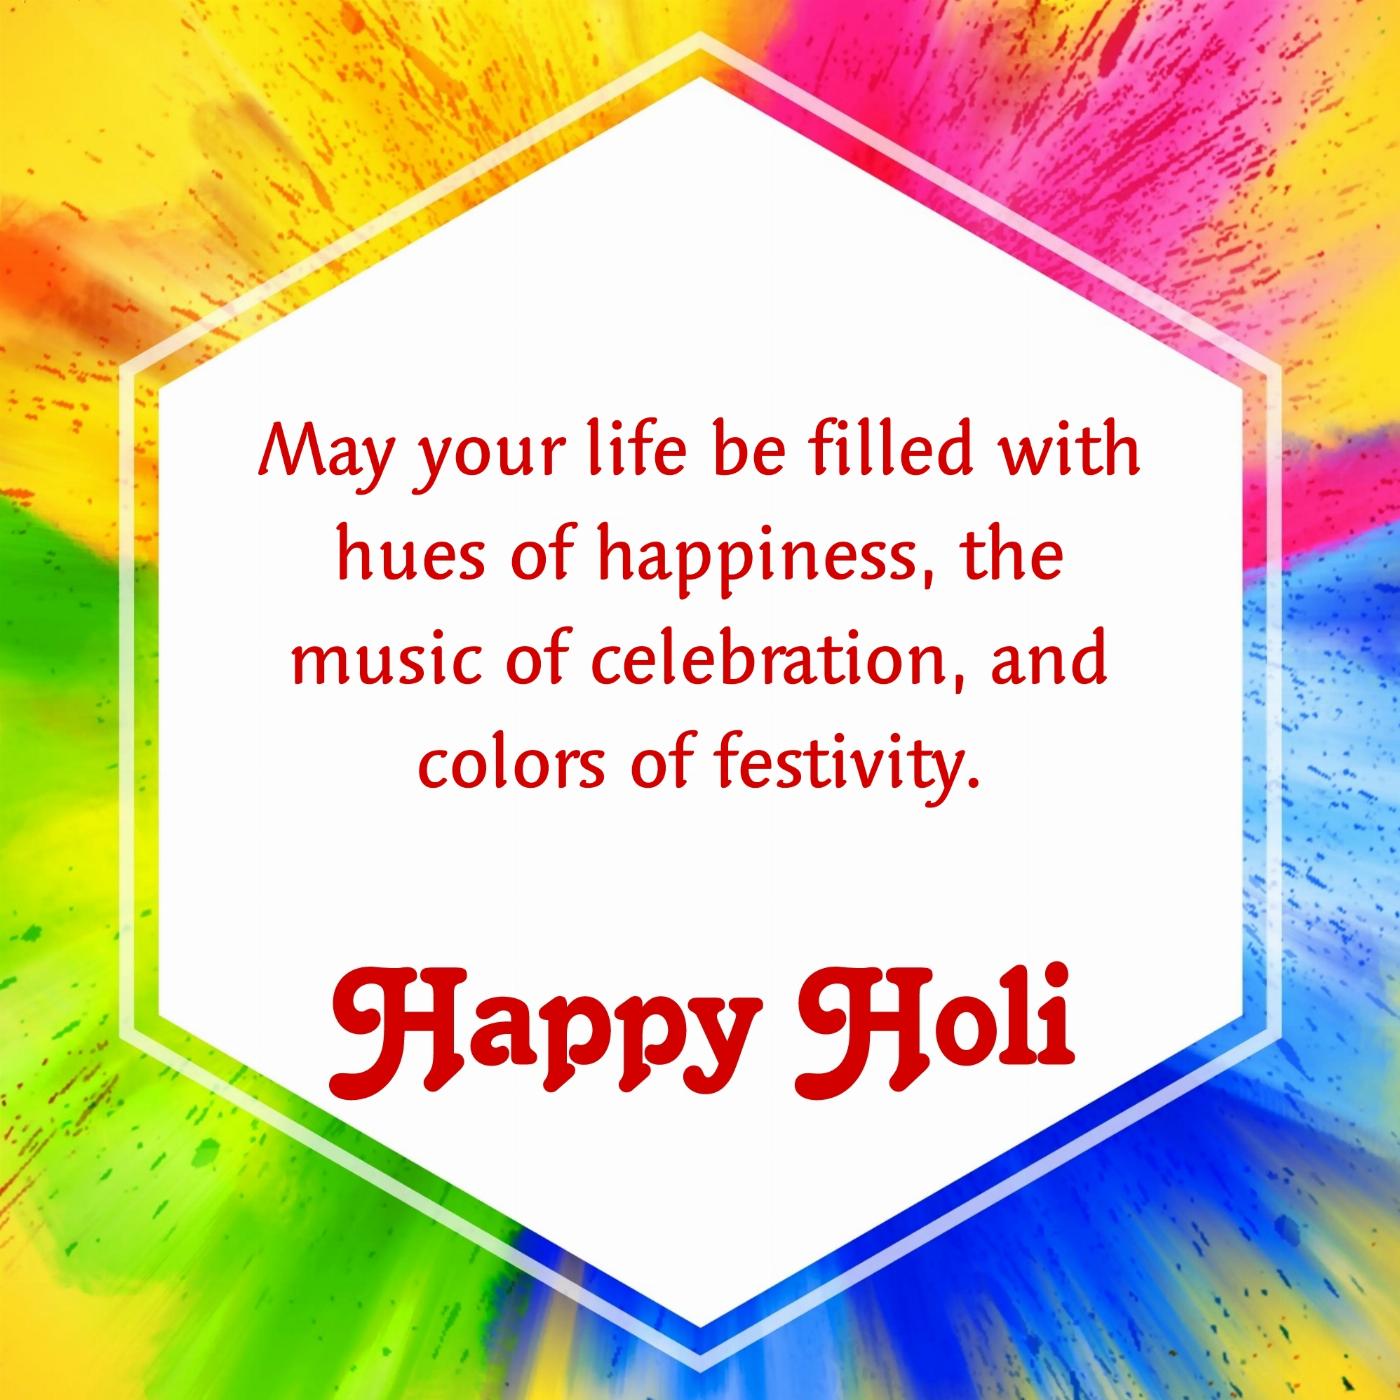 May your life be filled with hues of happiness the music of celebration